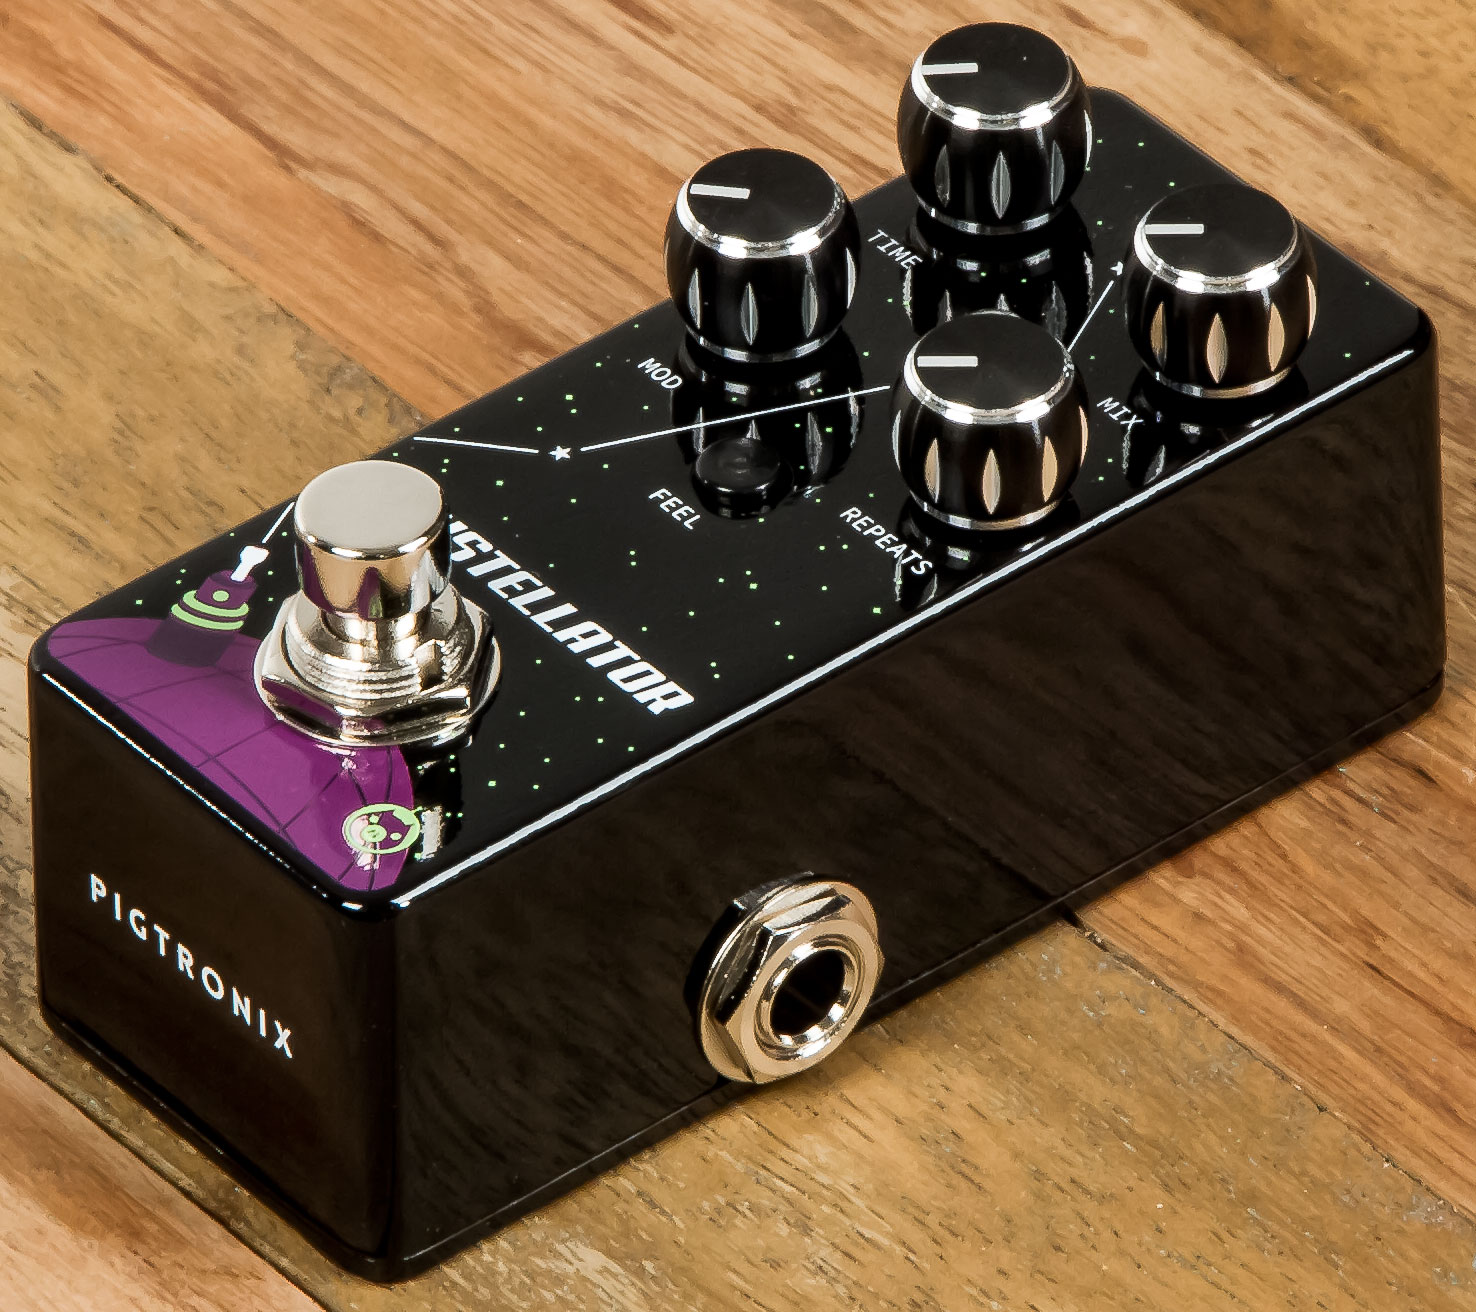 Pigtronix Constellator Modulated Analog Delay - Reverb, delay & echo effect pedal - Variation 1